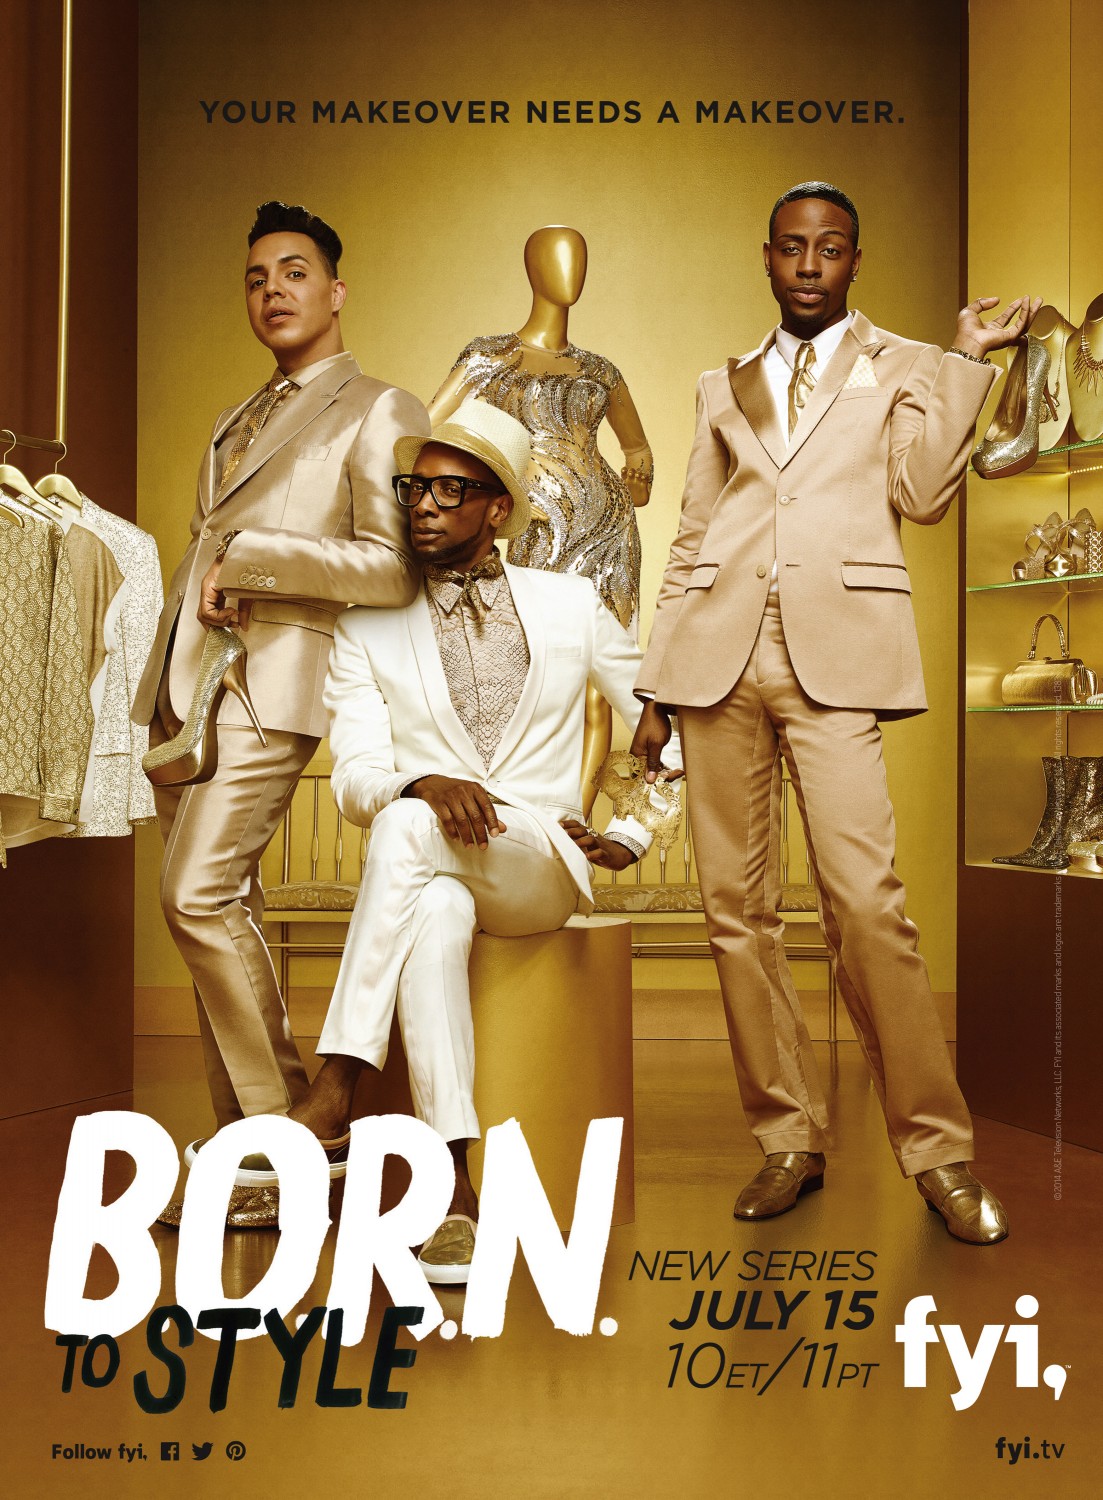 Extra Large TV Poster Image for B.O.R.N. to Style (#2 of 2)